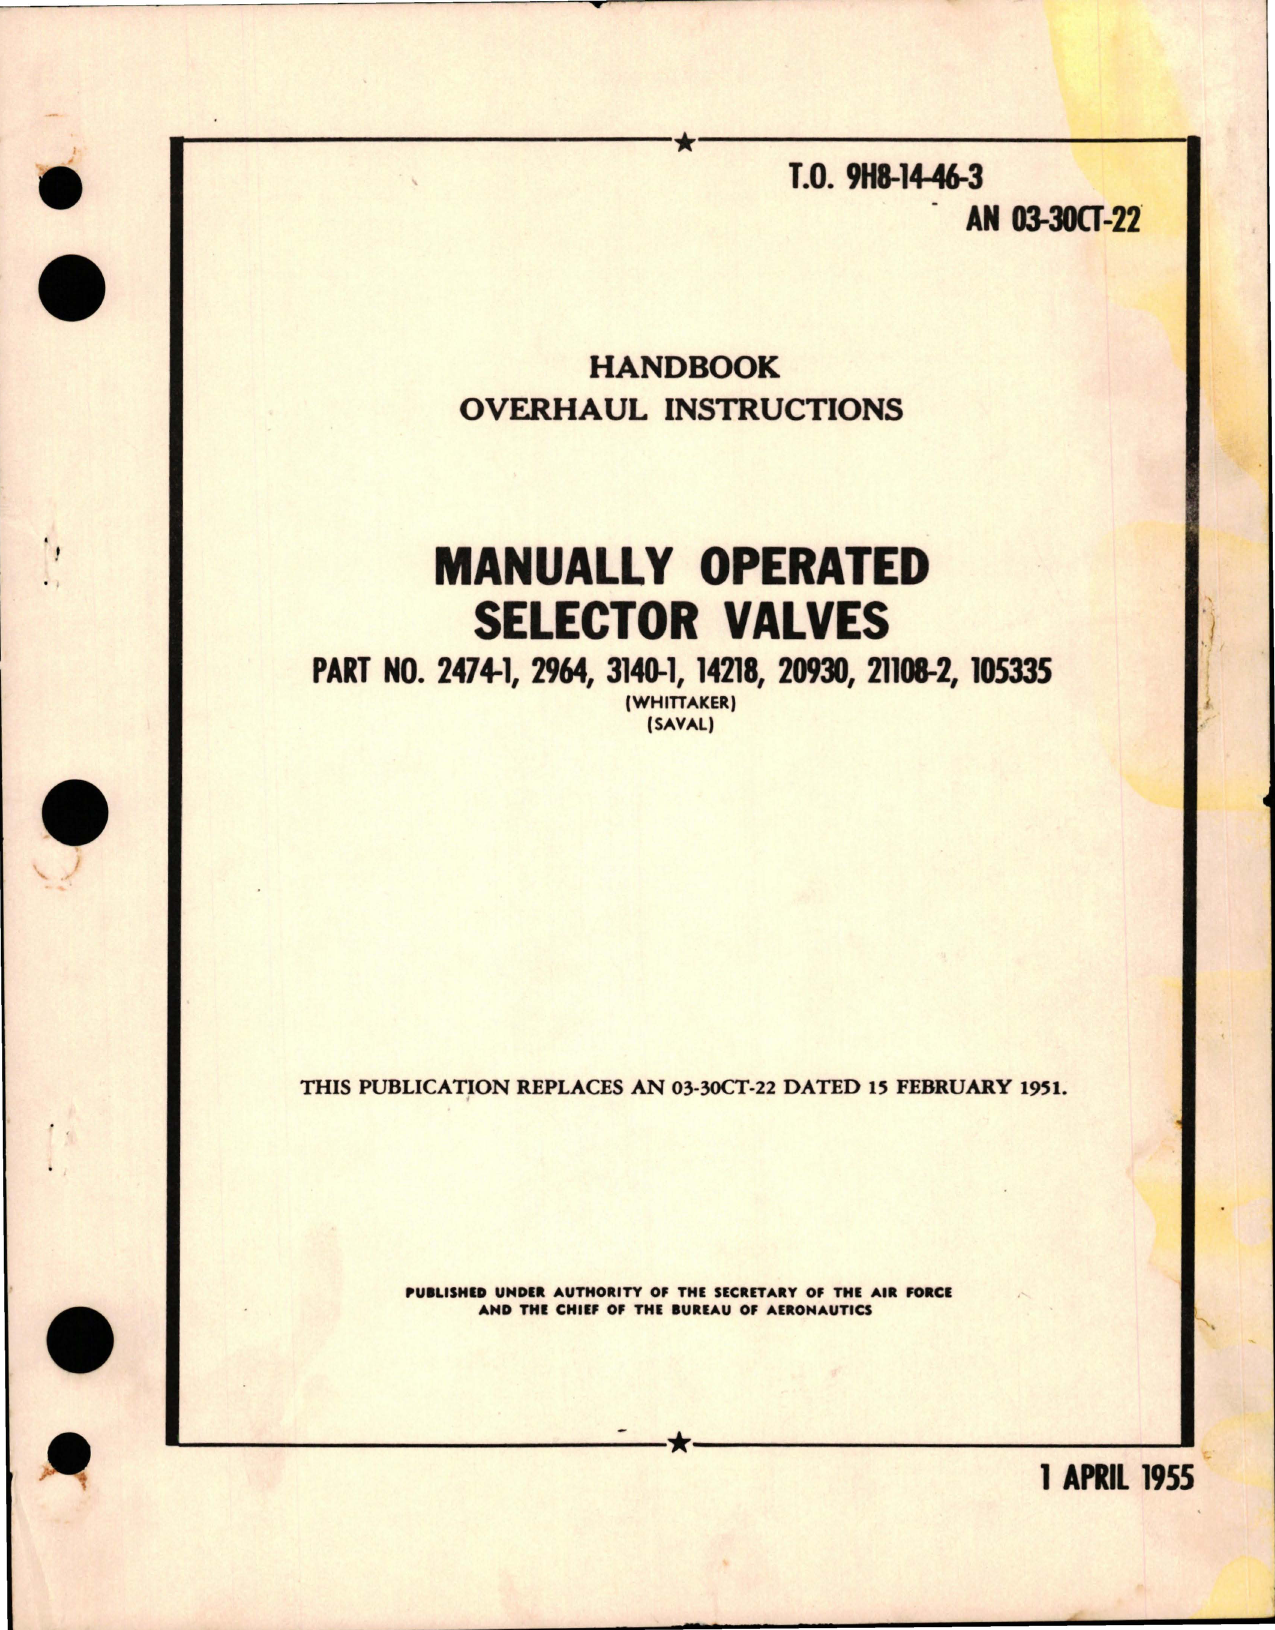 Sample page 1 from AirCorps Library document: Overhaul Instructions for Manually Operated Selector Valves